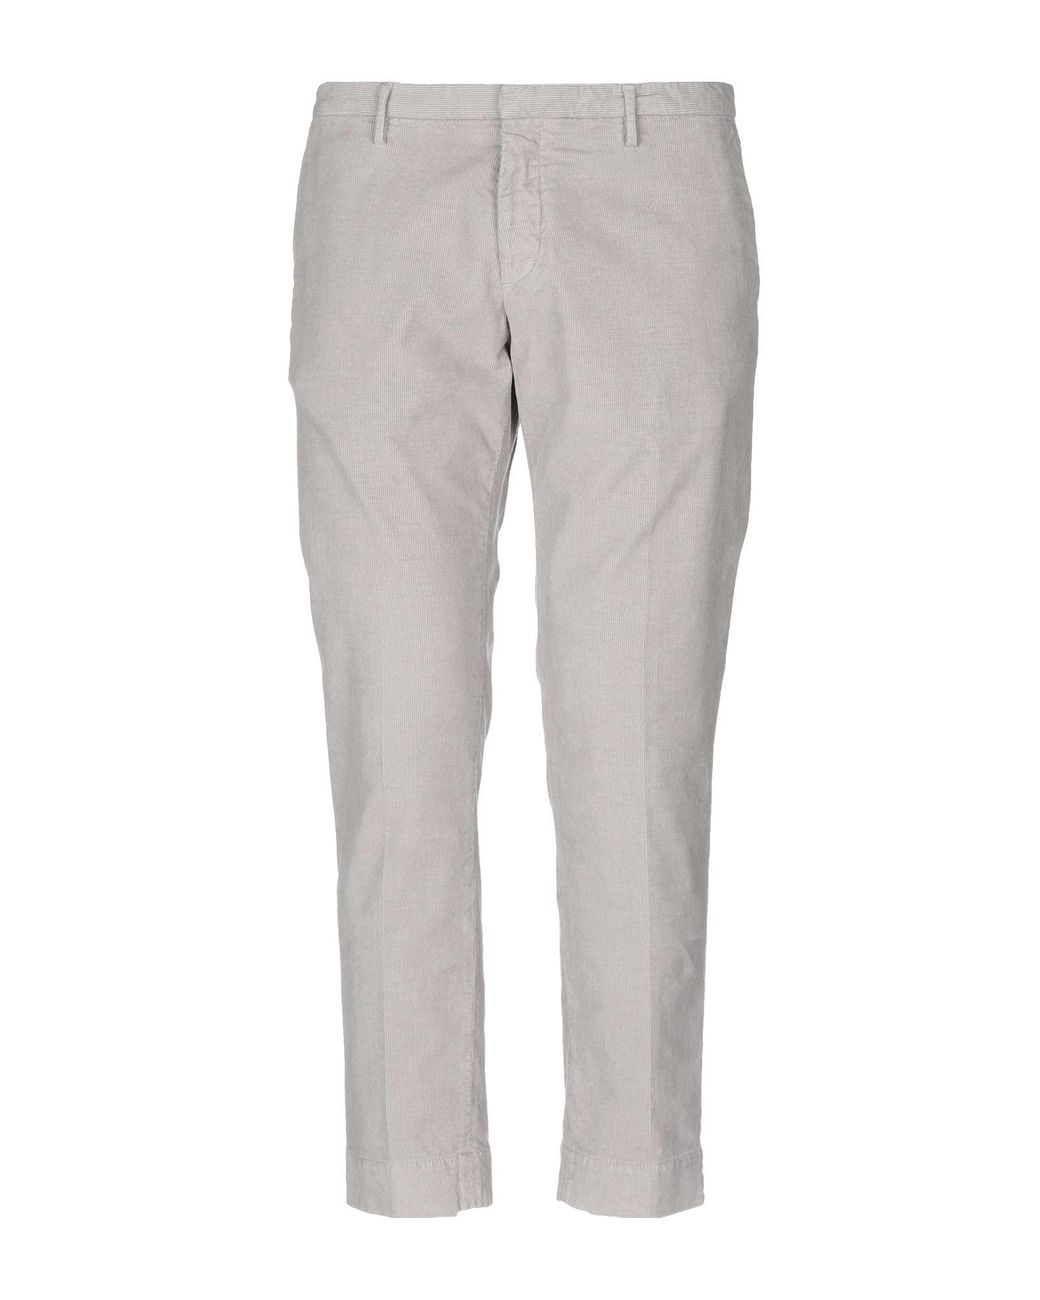 Paolo Pecora Casual Pants in Grey (Gray) for Men - Lyst